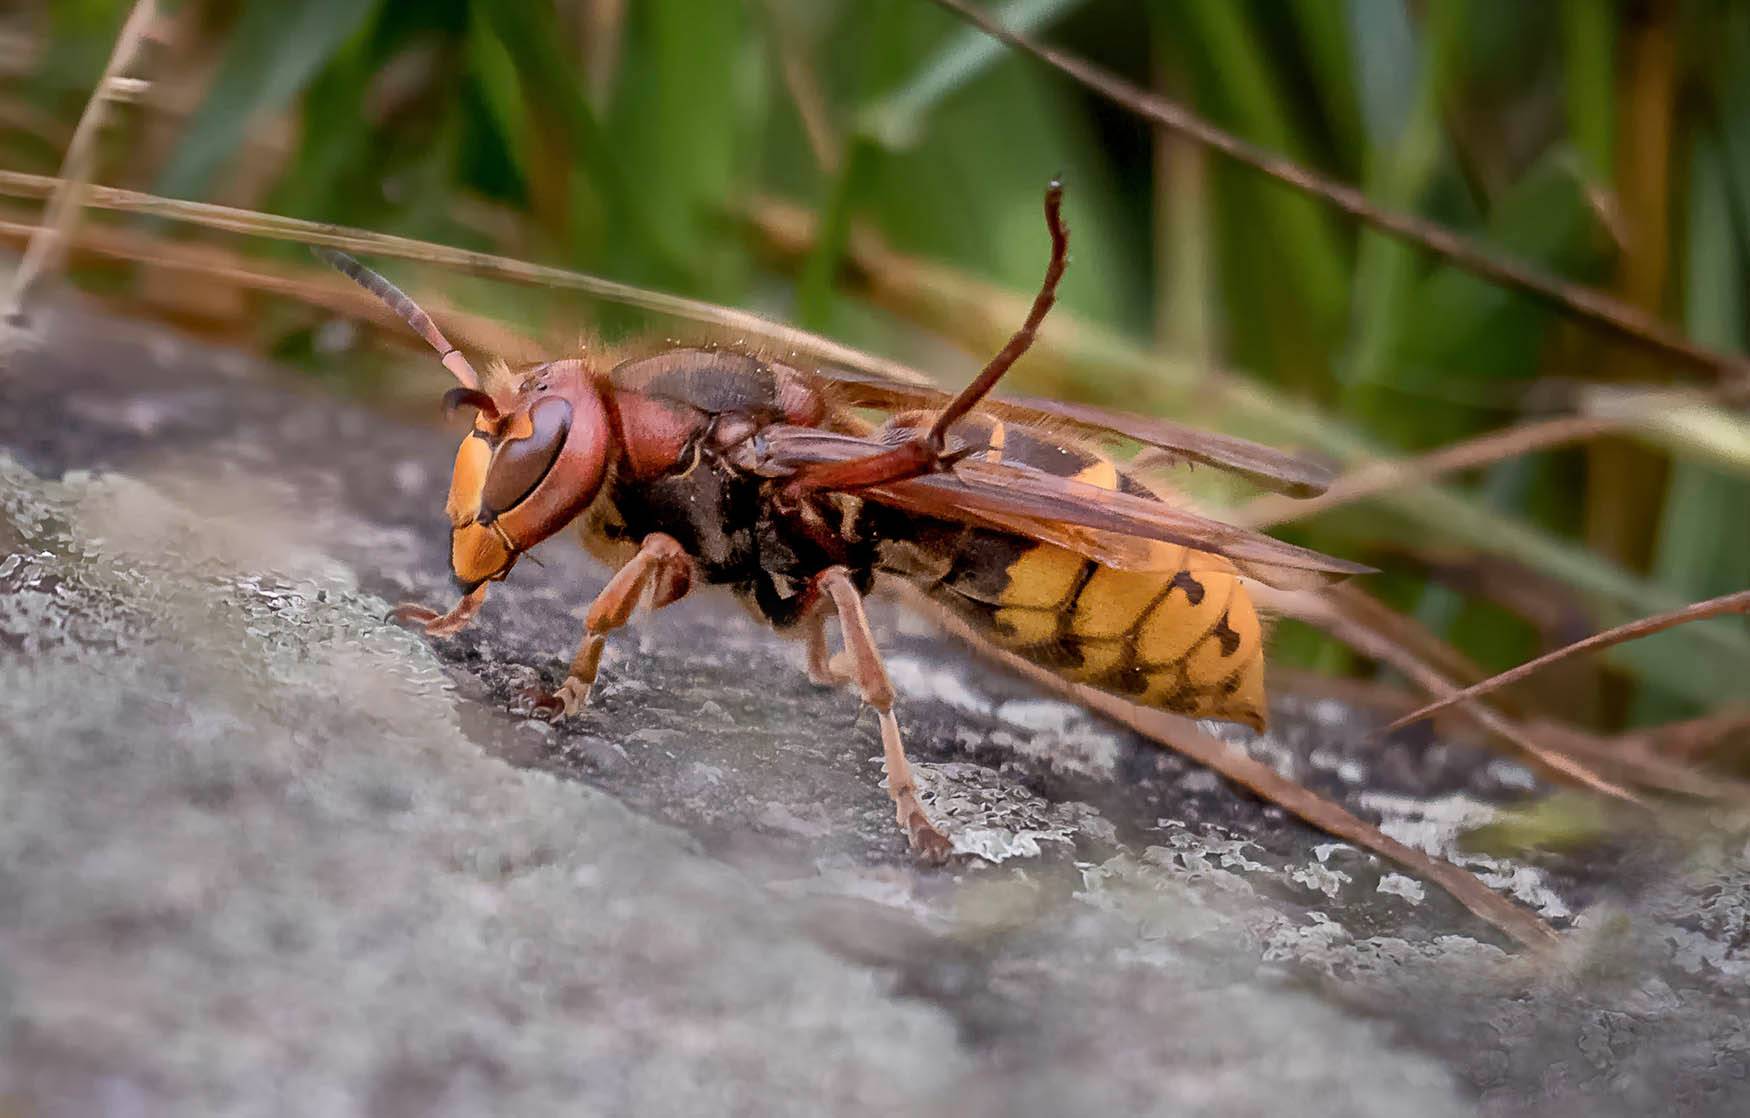 Bees are using poop to defend themselves in opposition to ‘raze hornets’